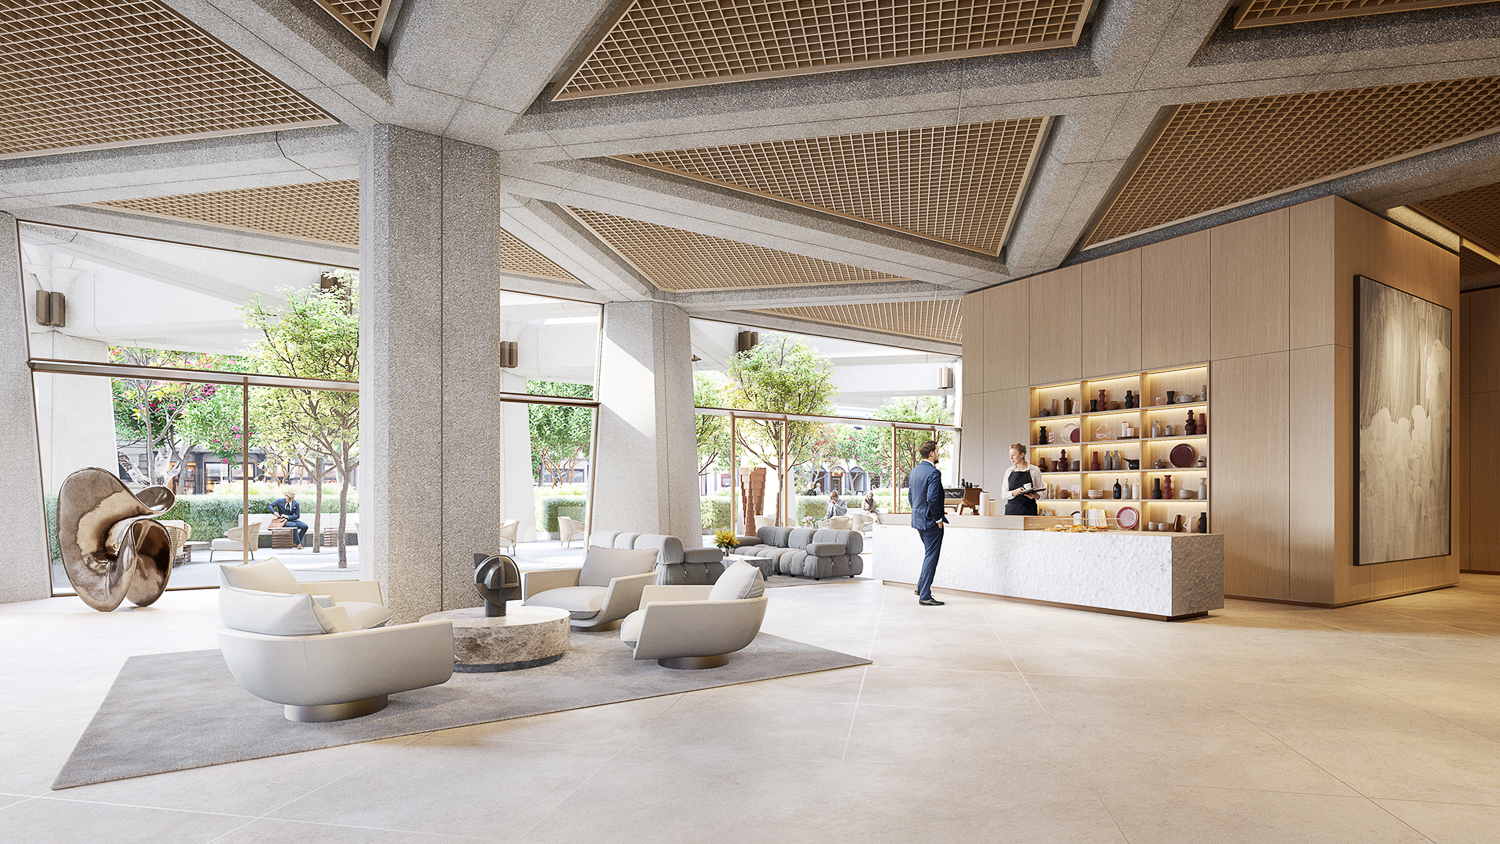 Transamerica Pyramid proposed lobby with exposed concrete lattice ceiling, rendering by DBOX, design by Foster + Partners